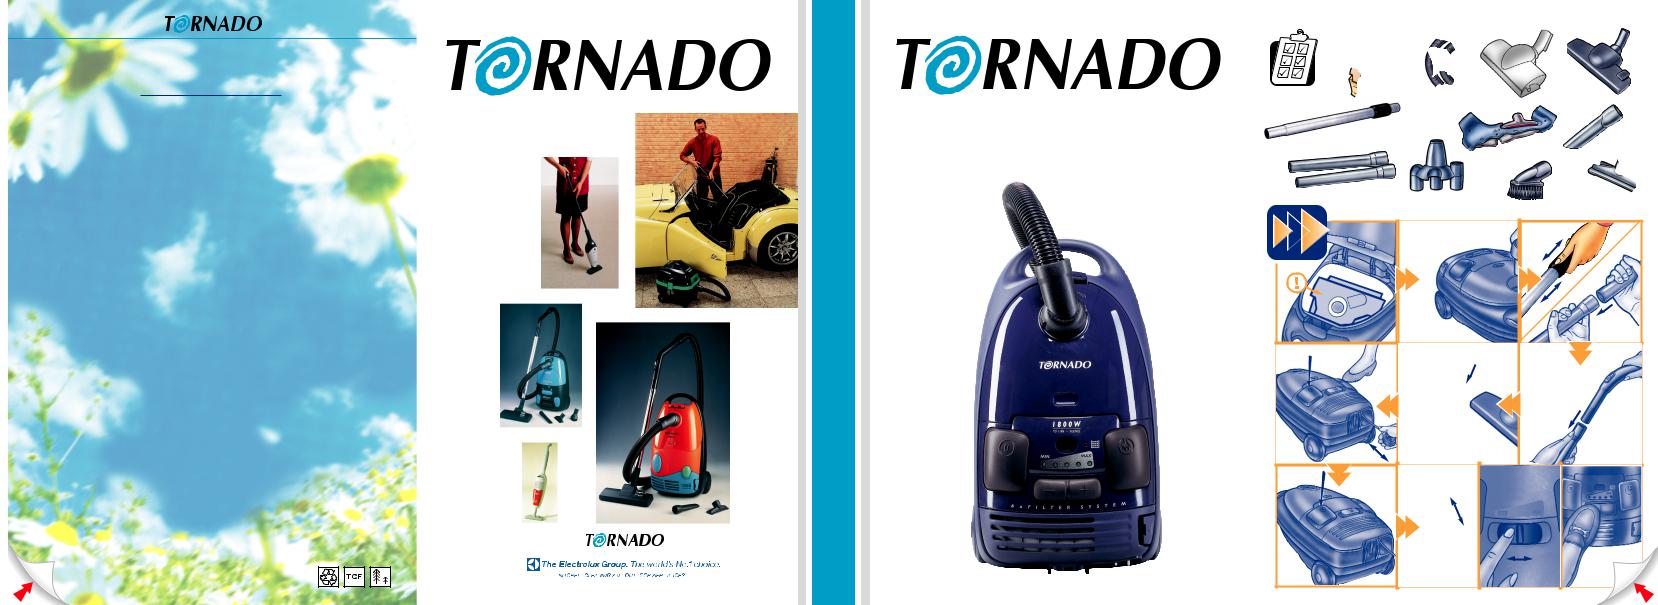 TORNADO TO 1900, TO1147, TO1148, TO1149, TO1186 User Manual